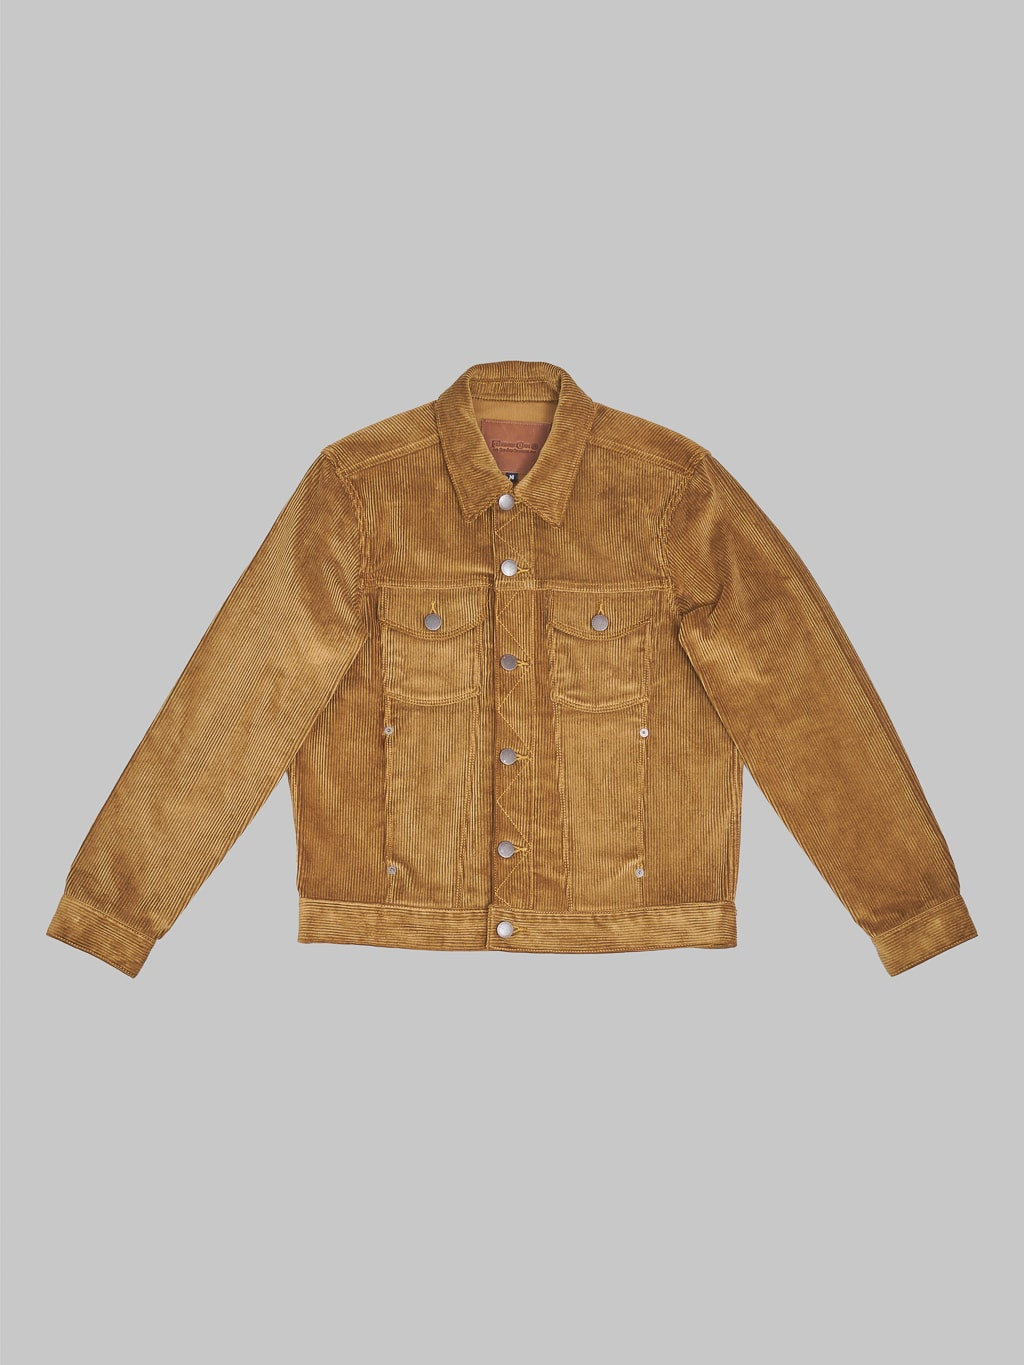 Freenote Cloth Classic Jacket Gold Corduroy  front